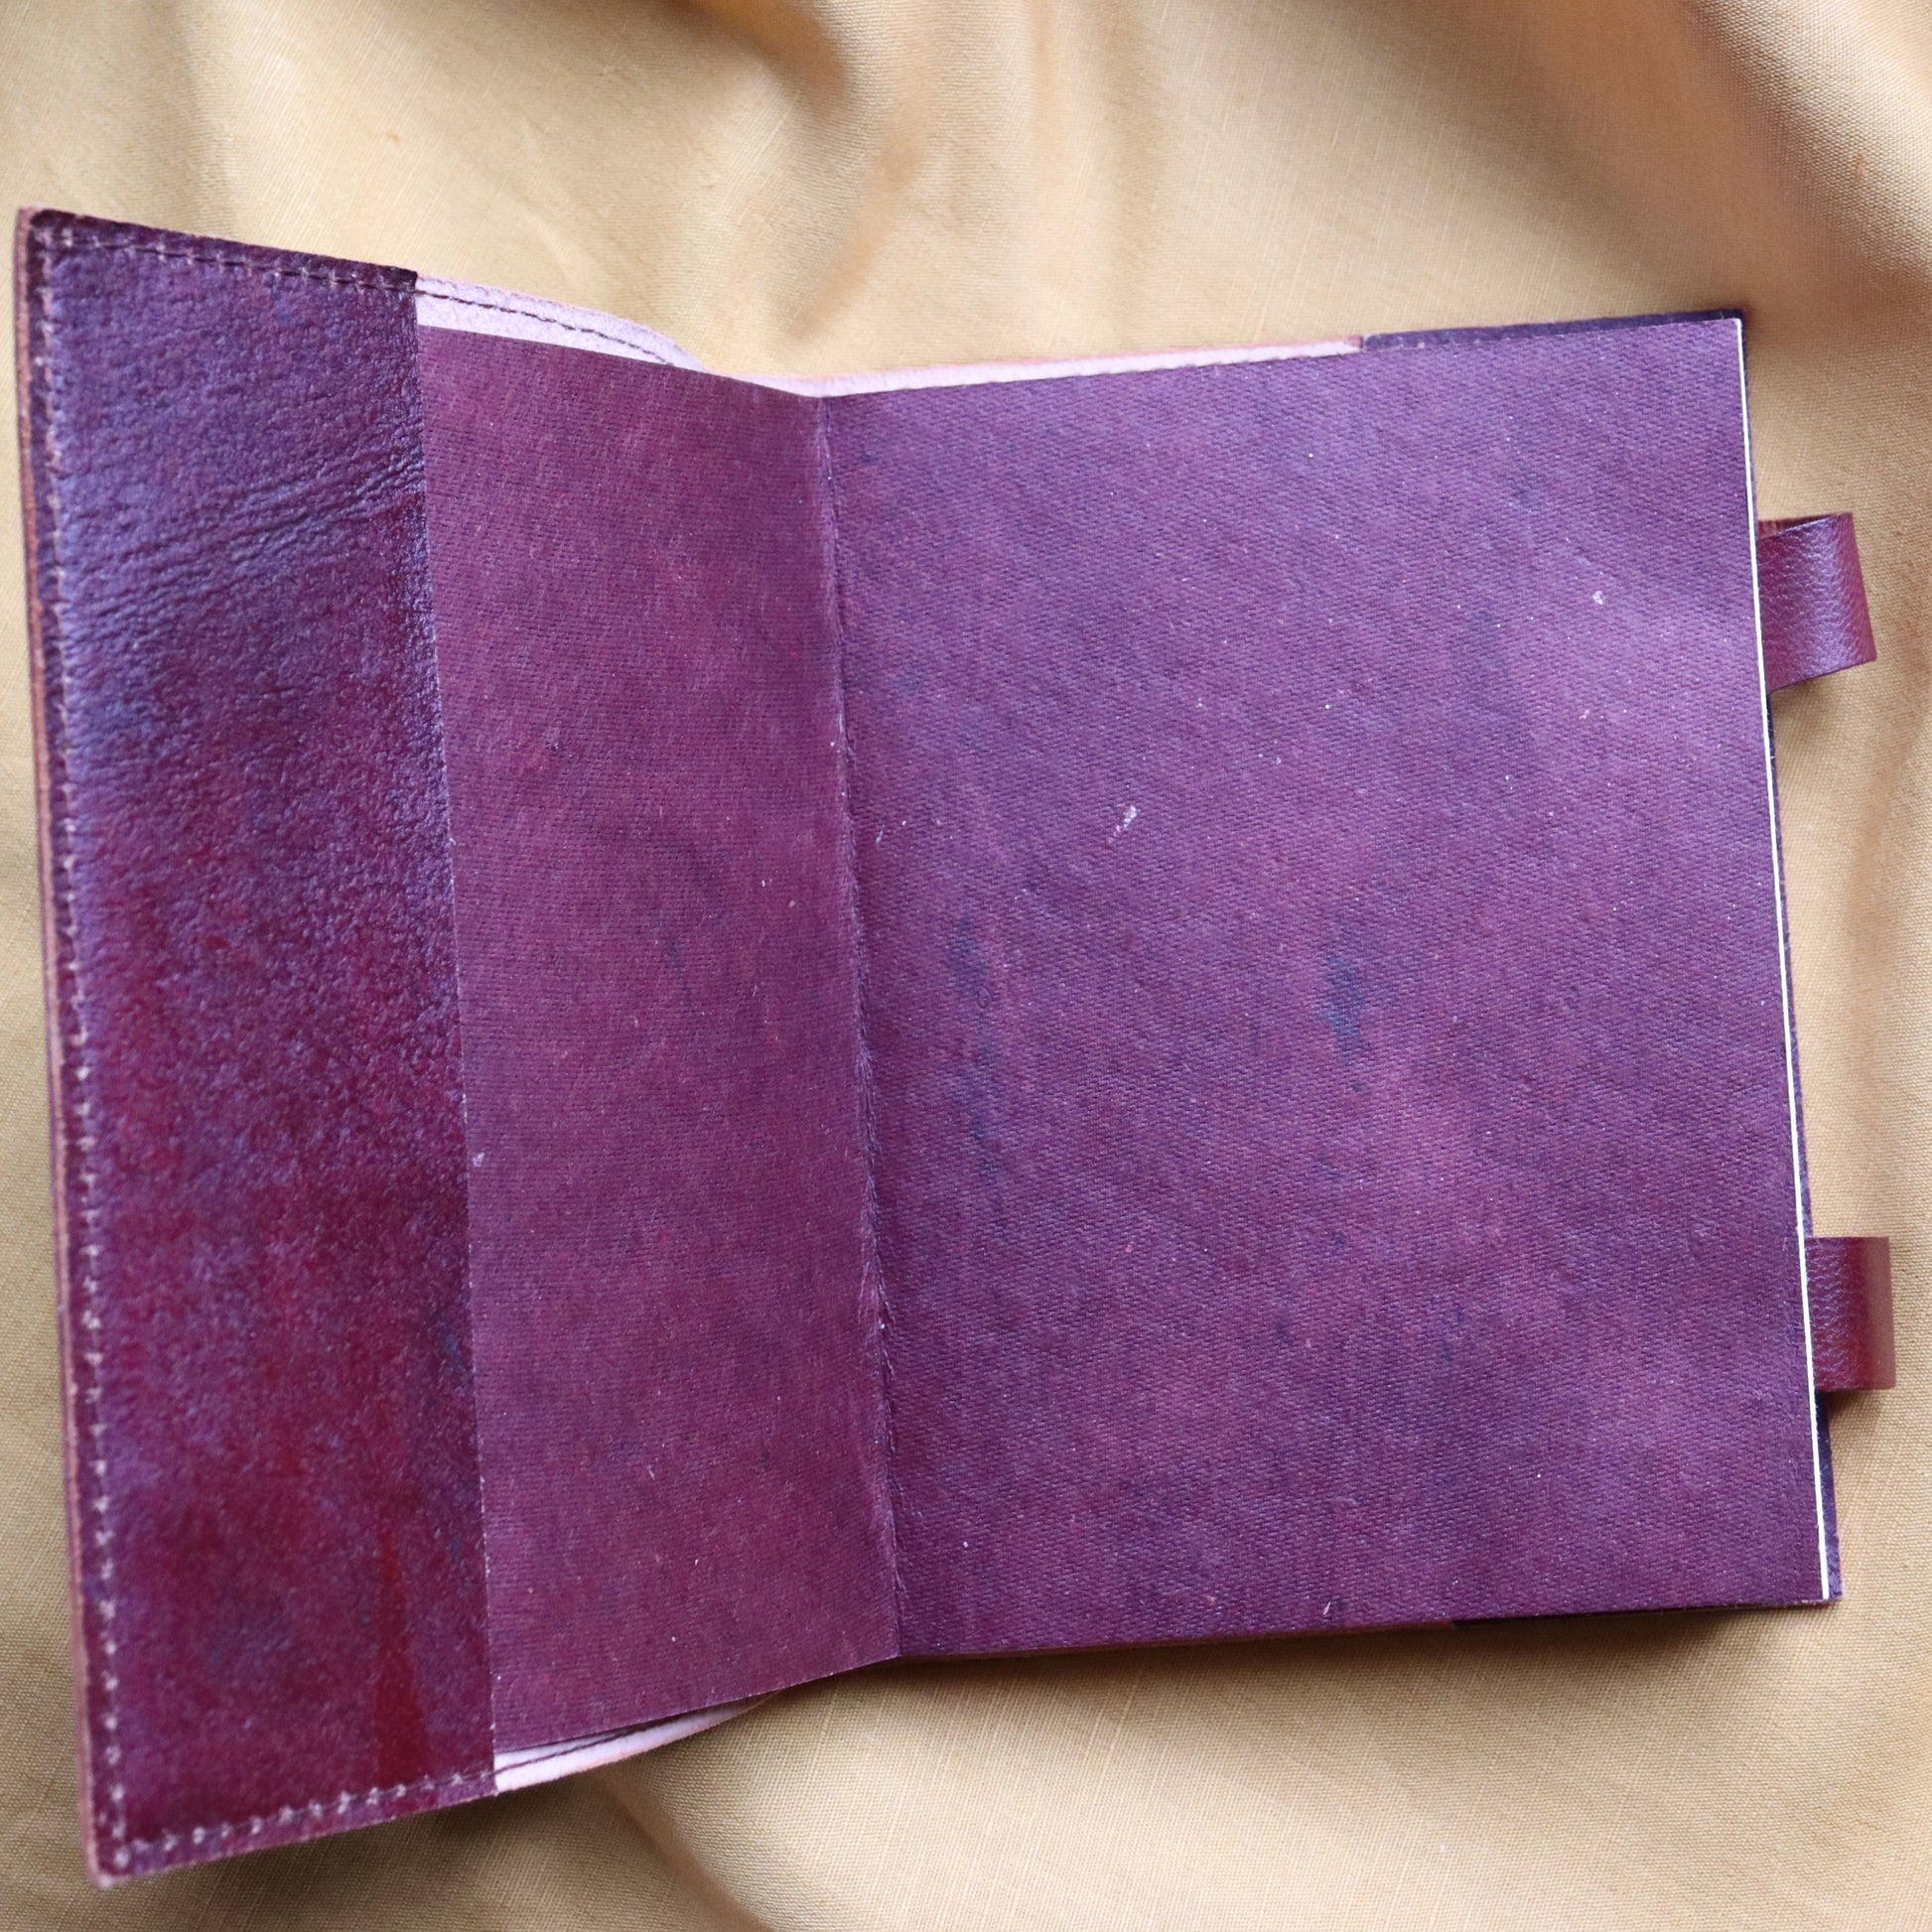 Sustainable Leather Journal - Elephant Diary, Tree-free paper, 96 Pages - Aksa Home Decor 